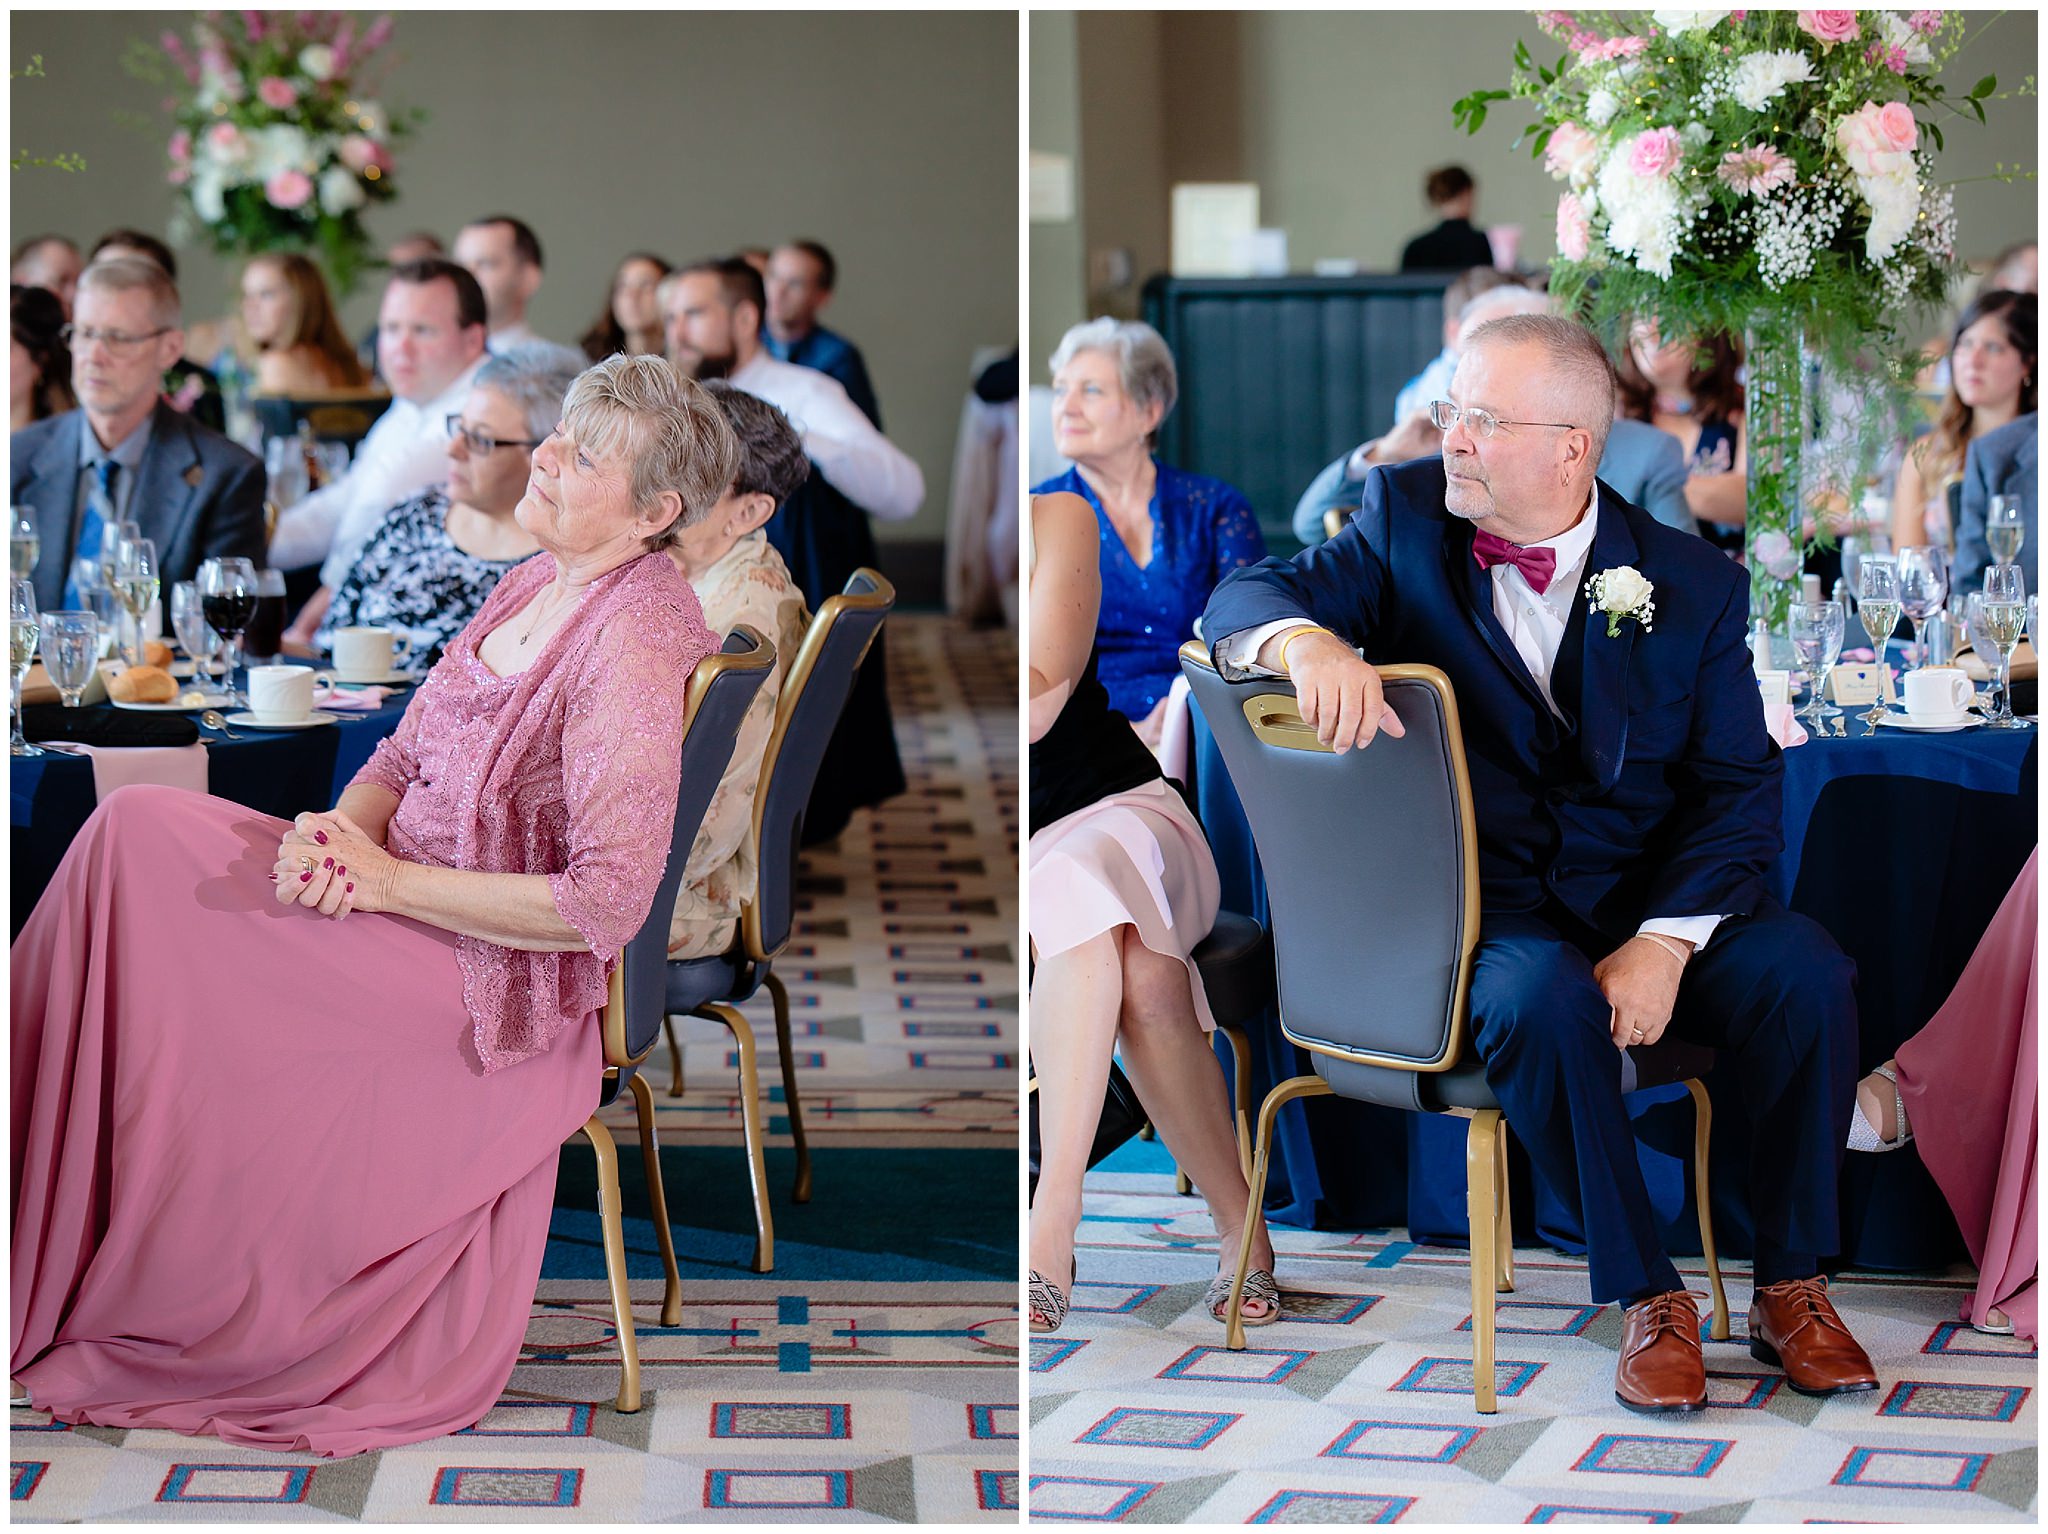 Parents of the groom listen to speeches at a Duquesne University wedding